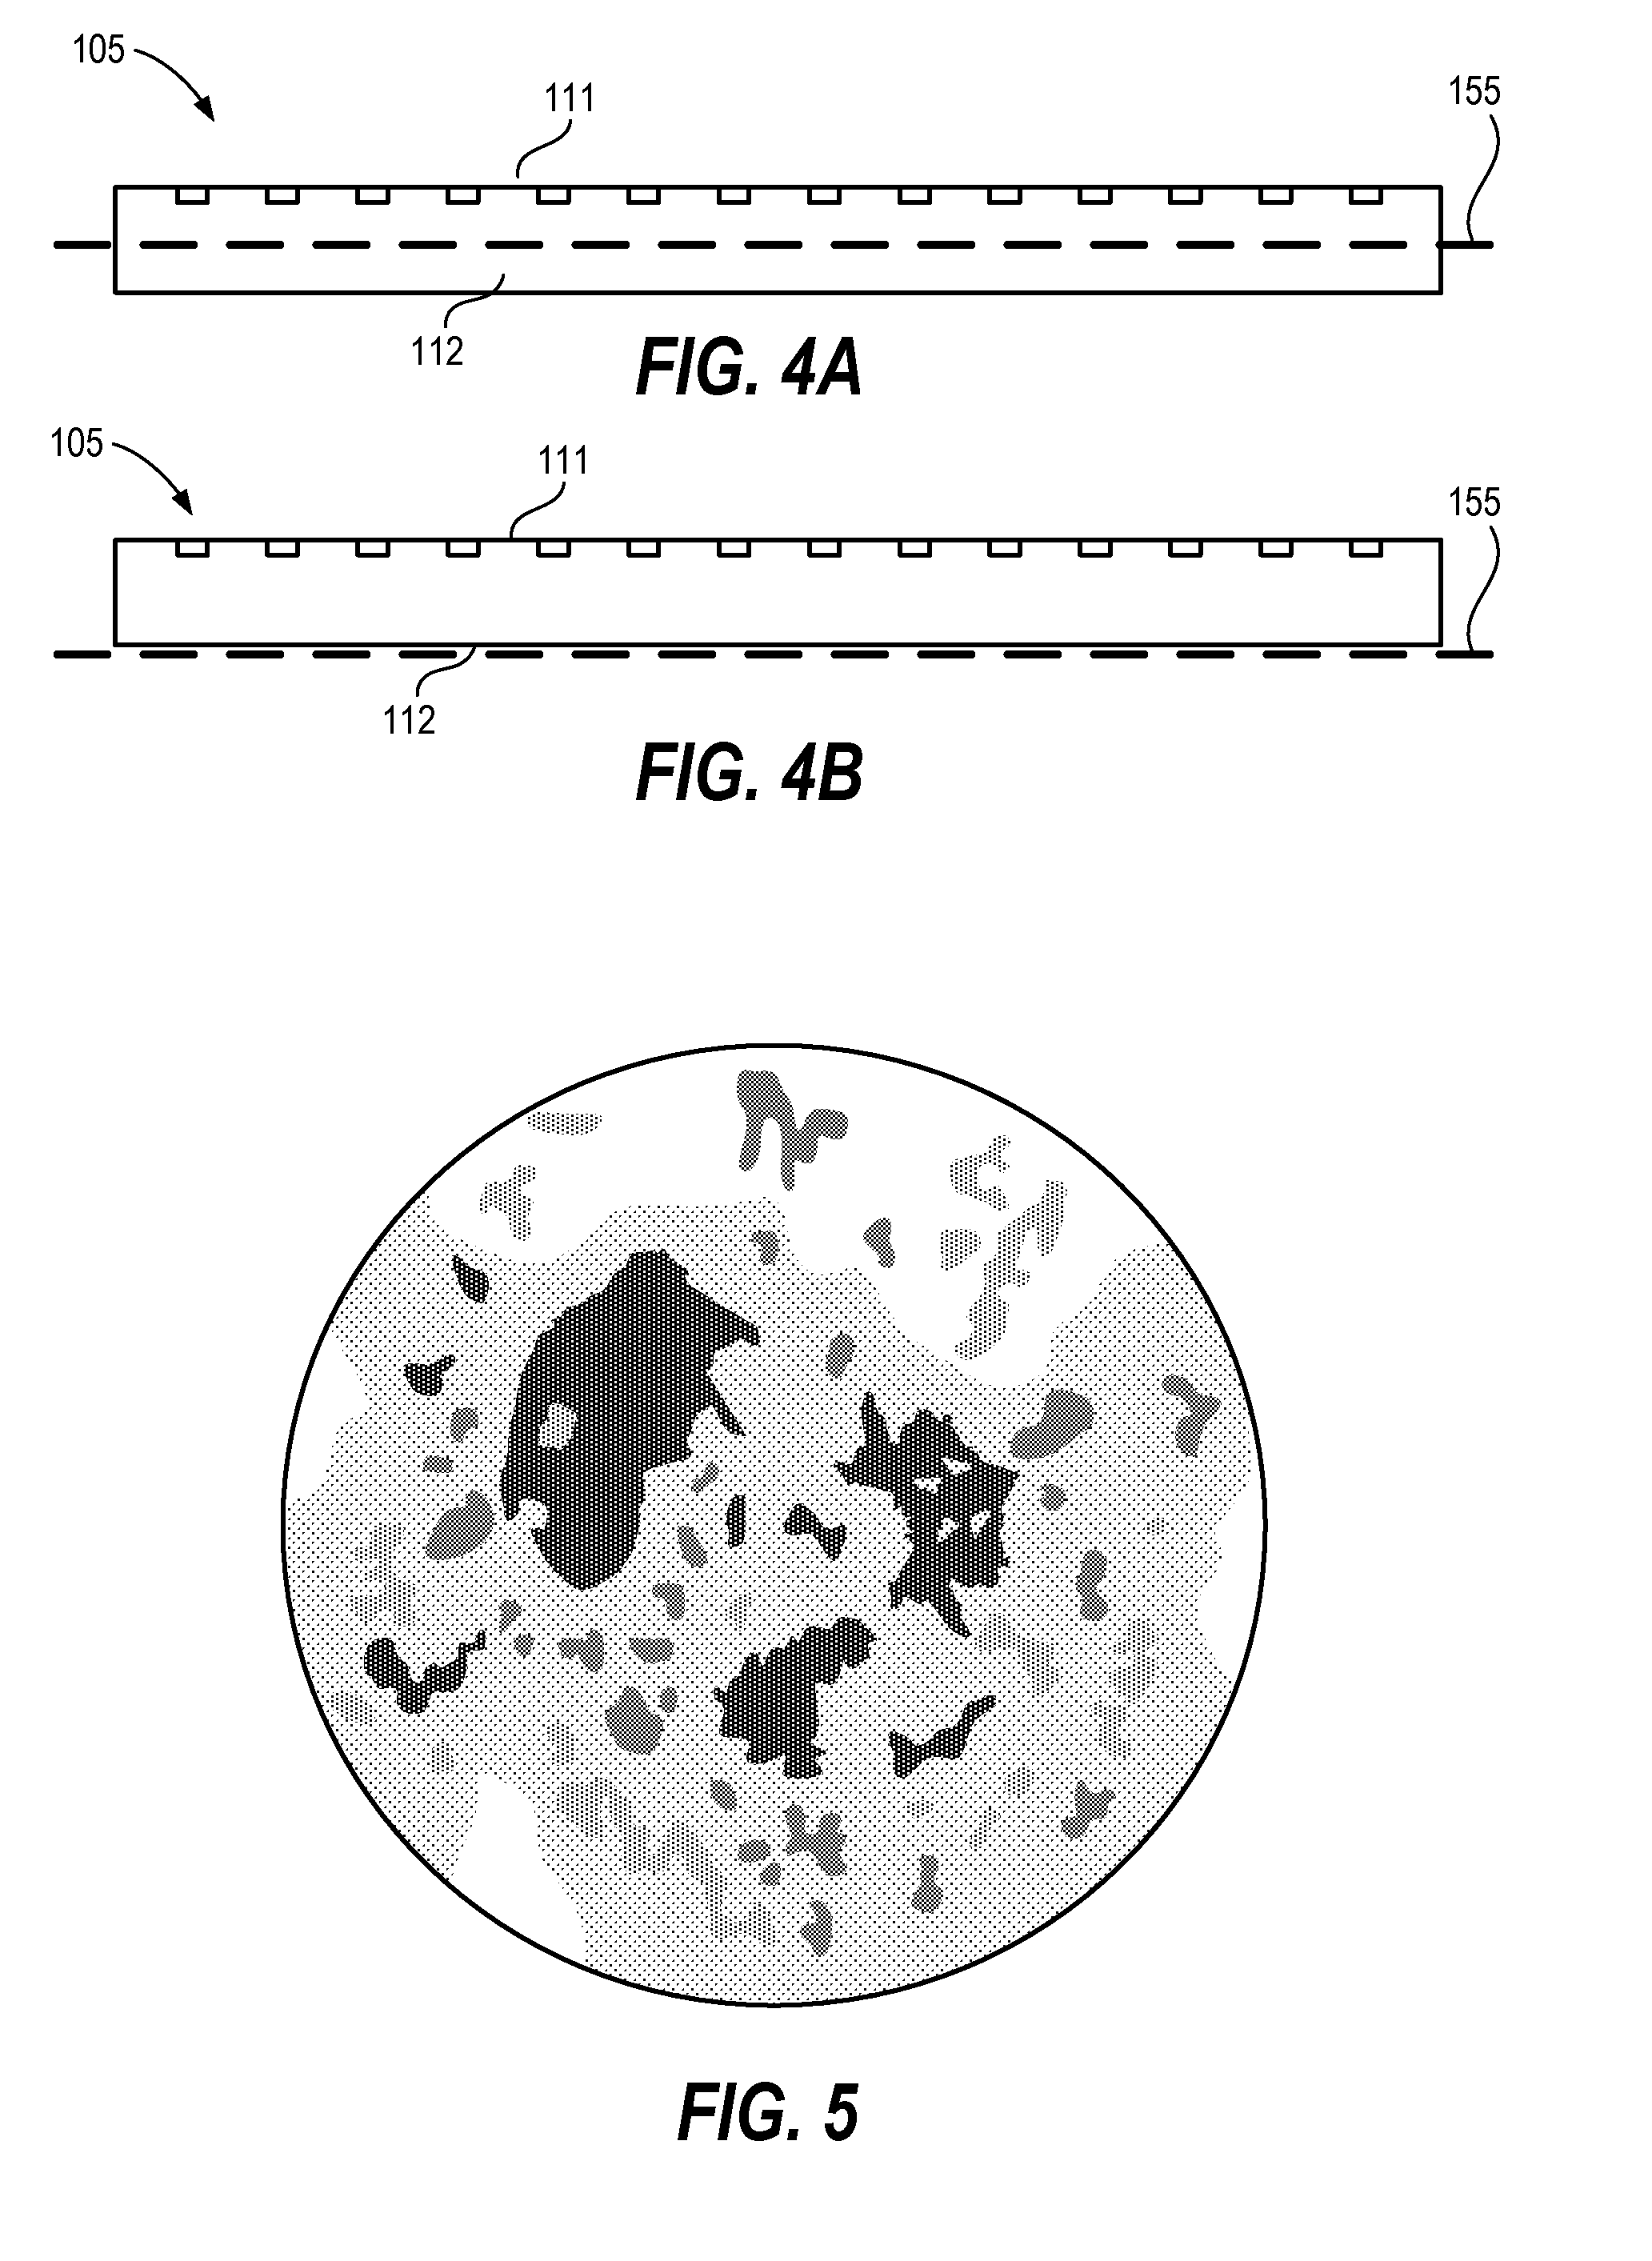 Method for Correcting Wafer Bow from Overlay